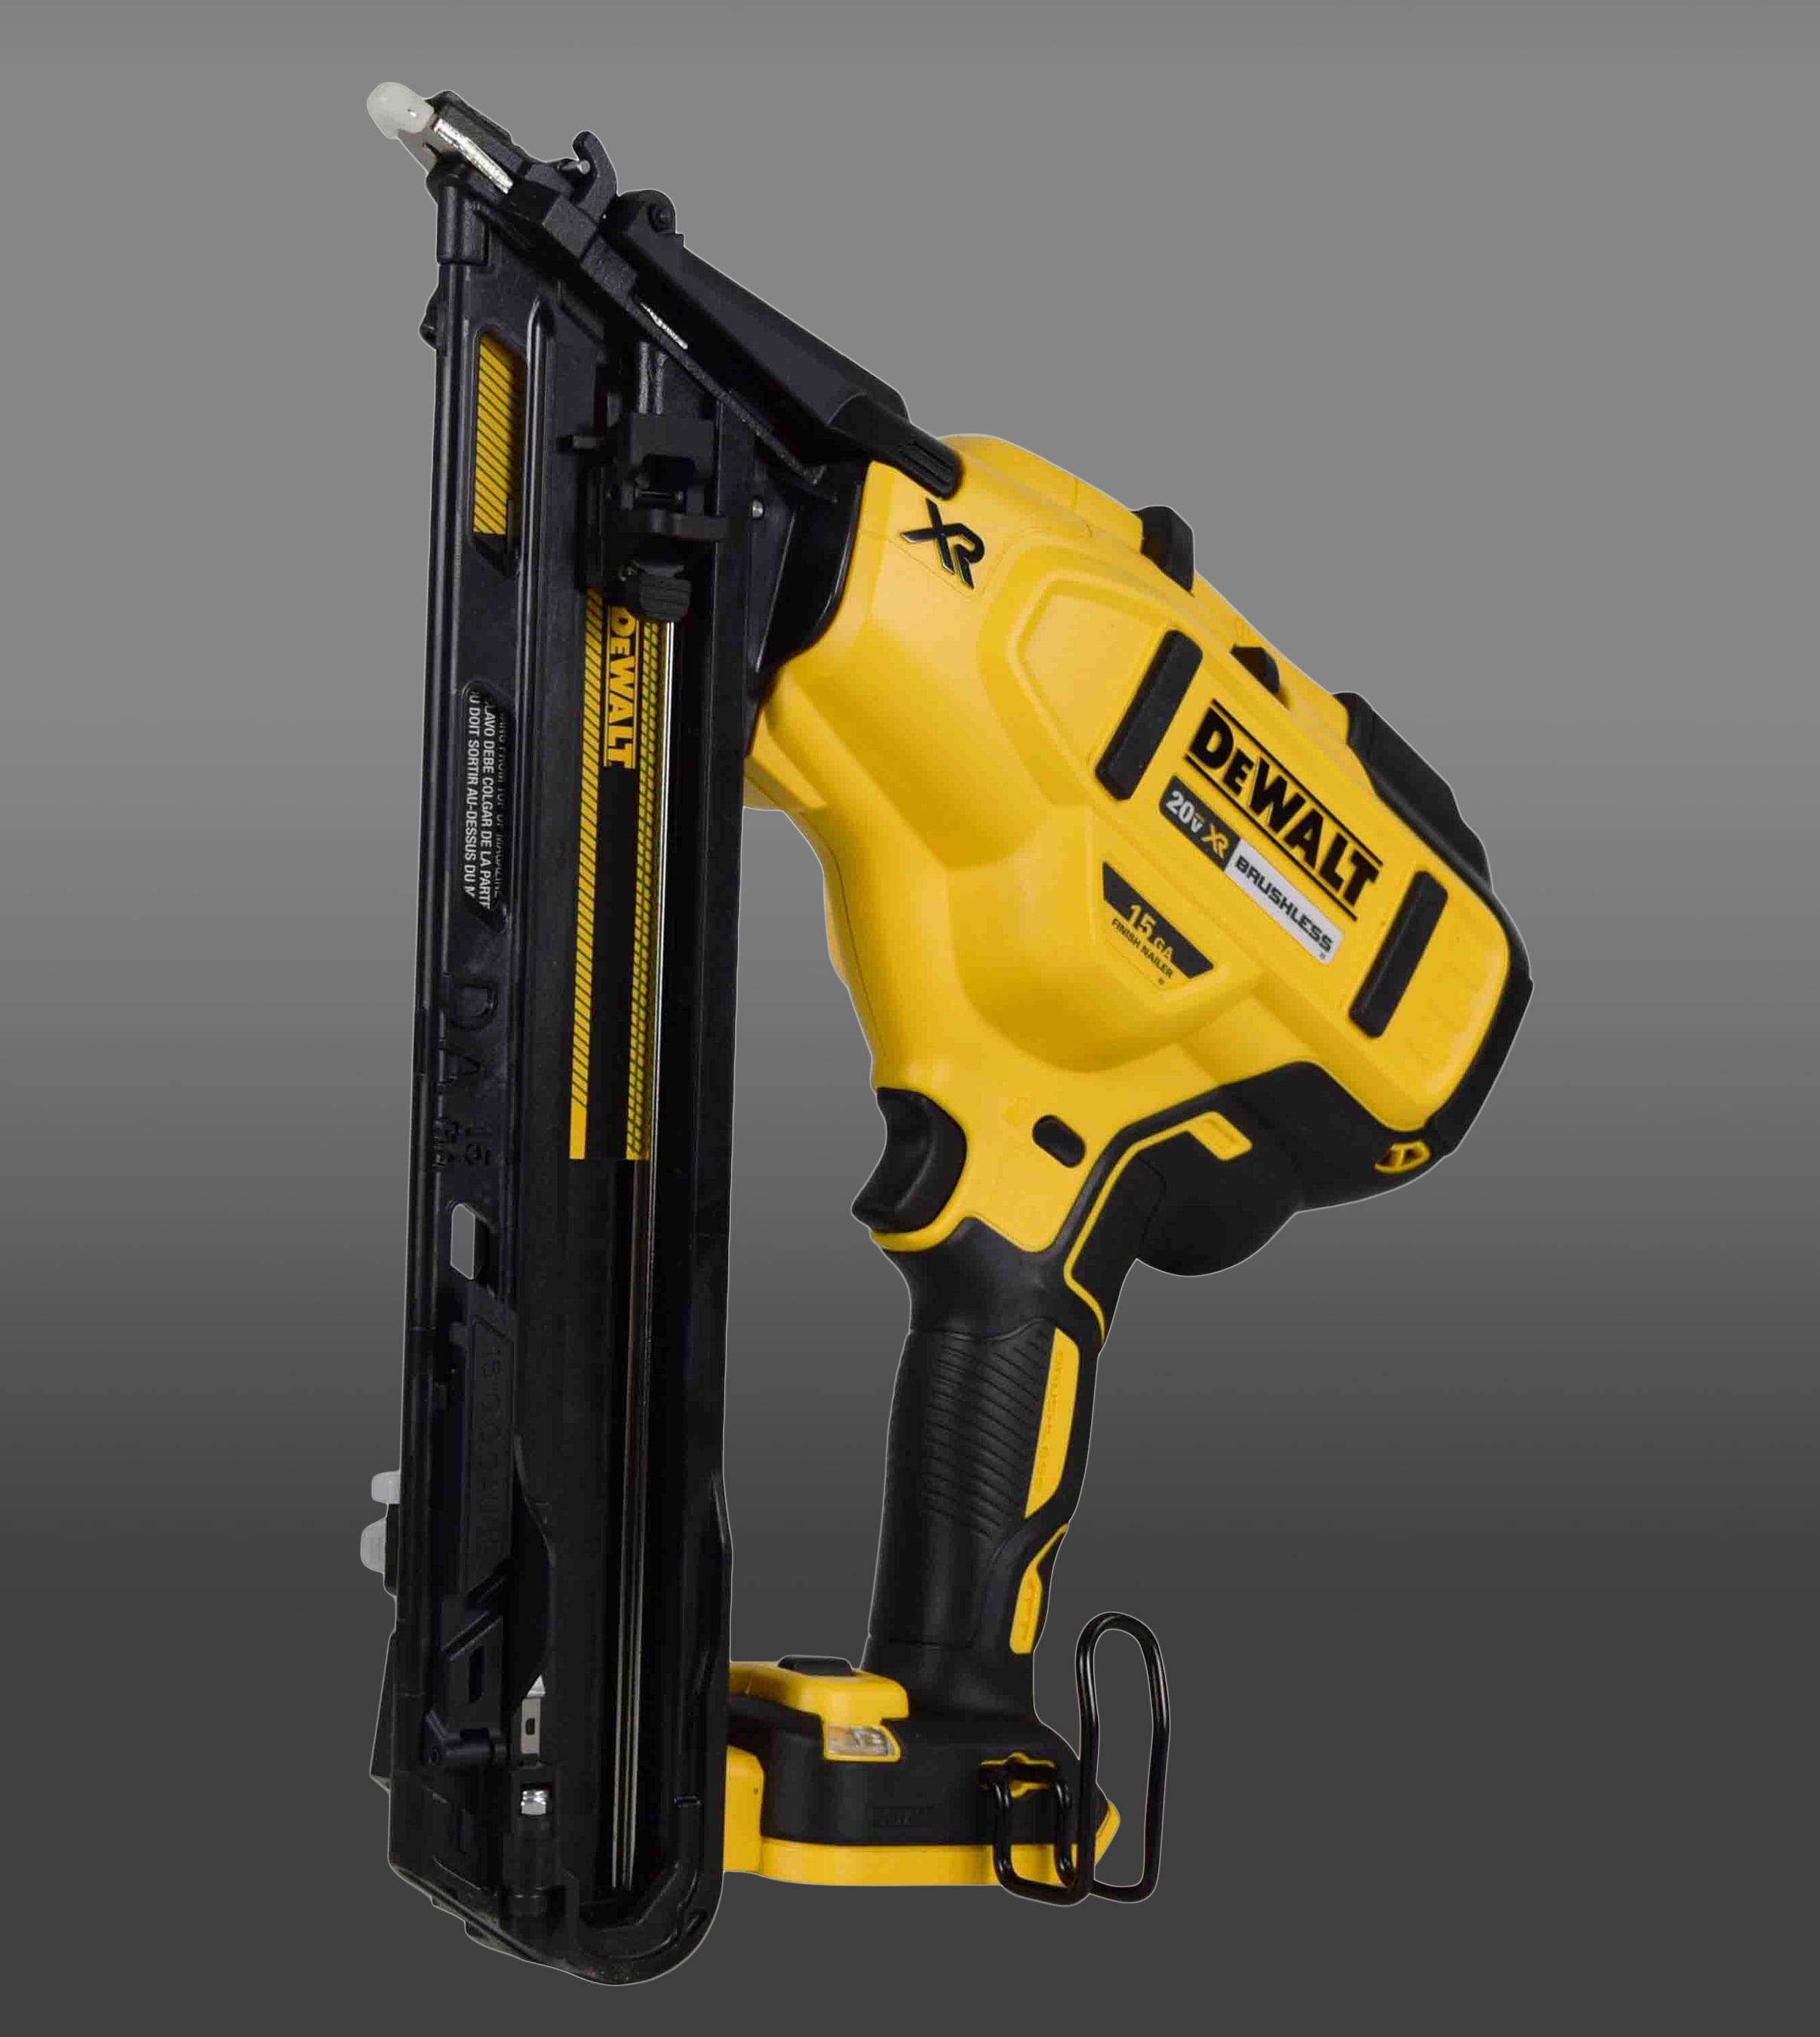 Details about   CN70 Coil Nailer 1-3/4" to 2-3/4" 15 Degree Pneumatic Coil Roofing Siding Nailer 